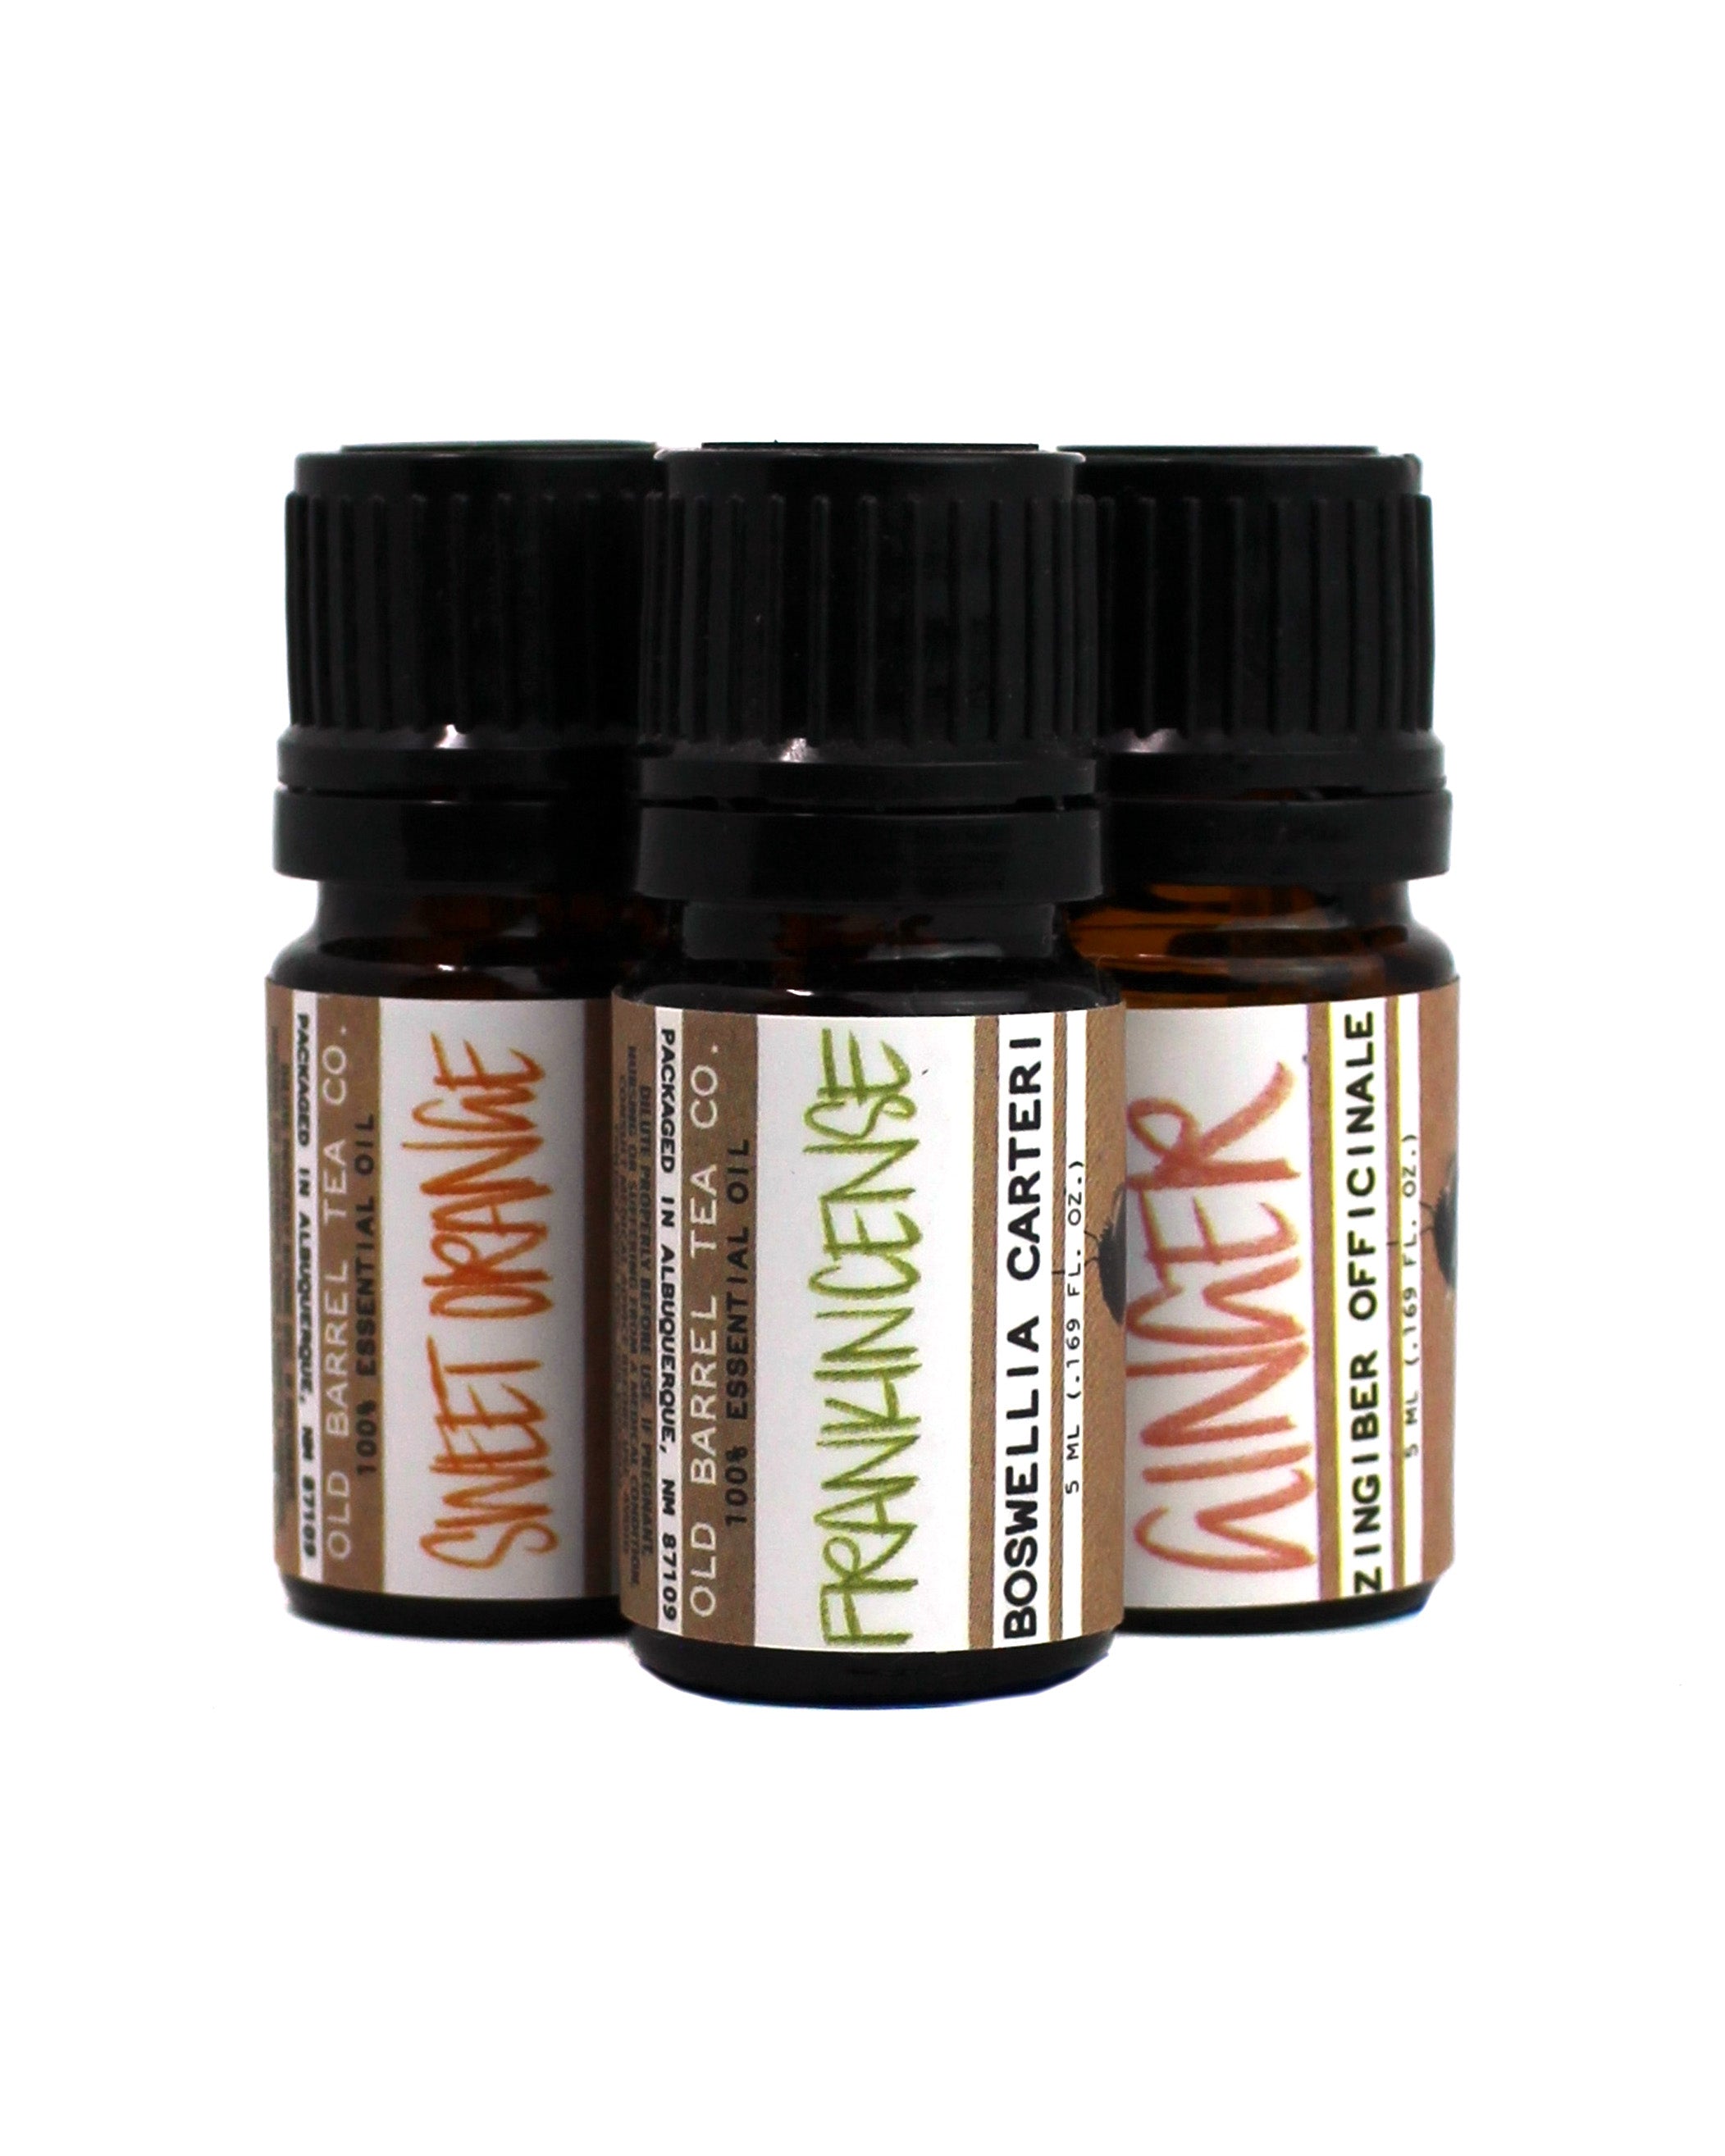 The Campfire Essential Oil Blend